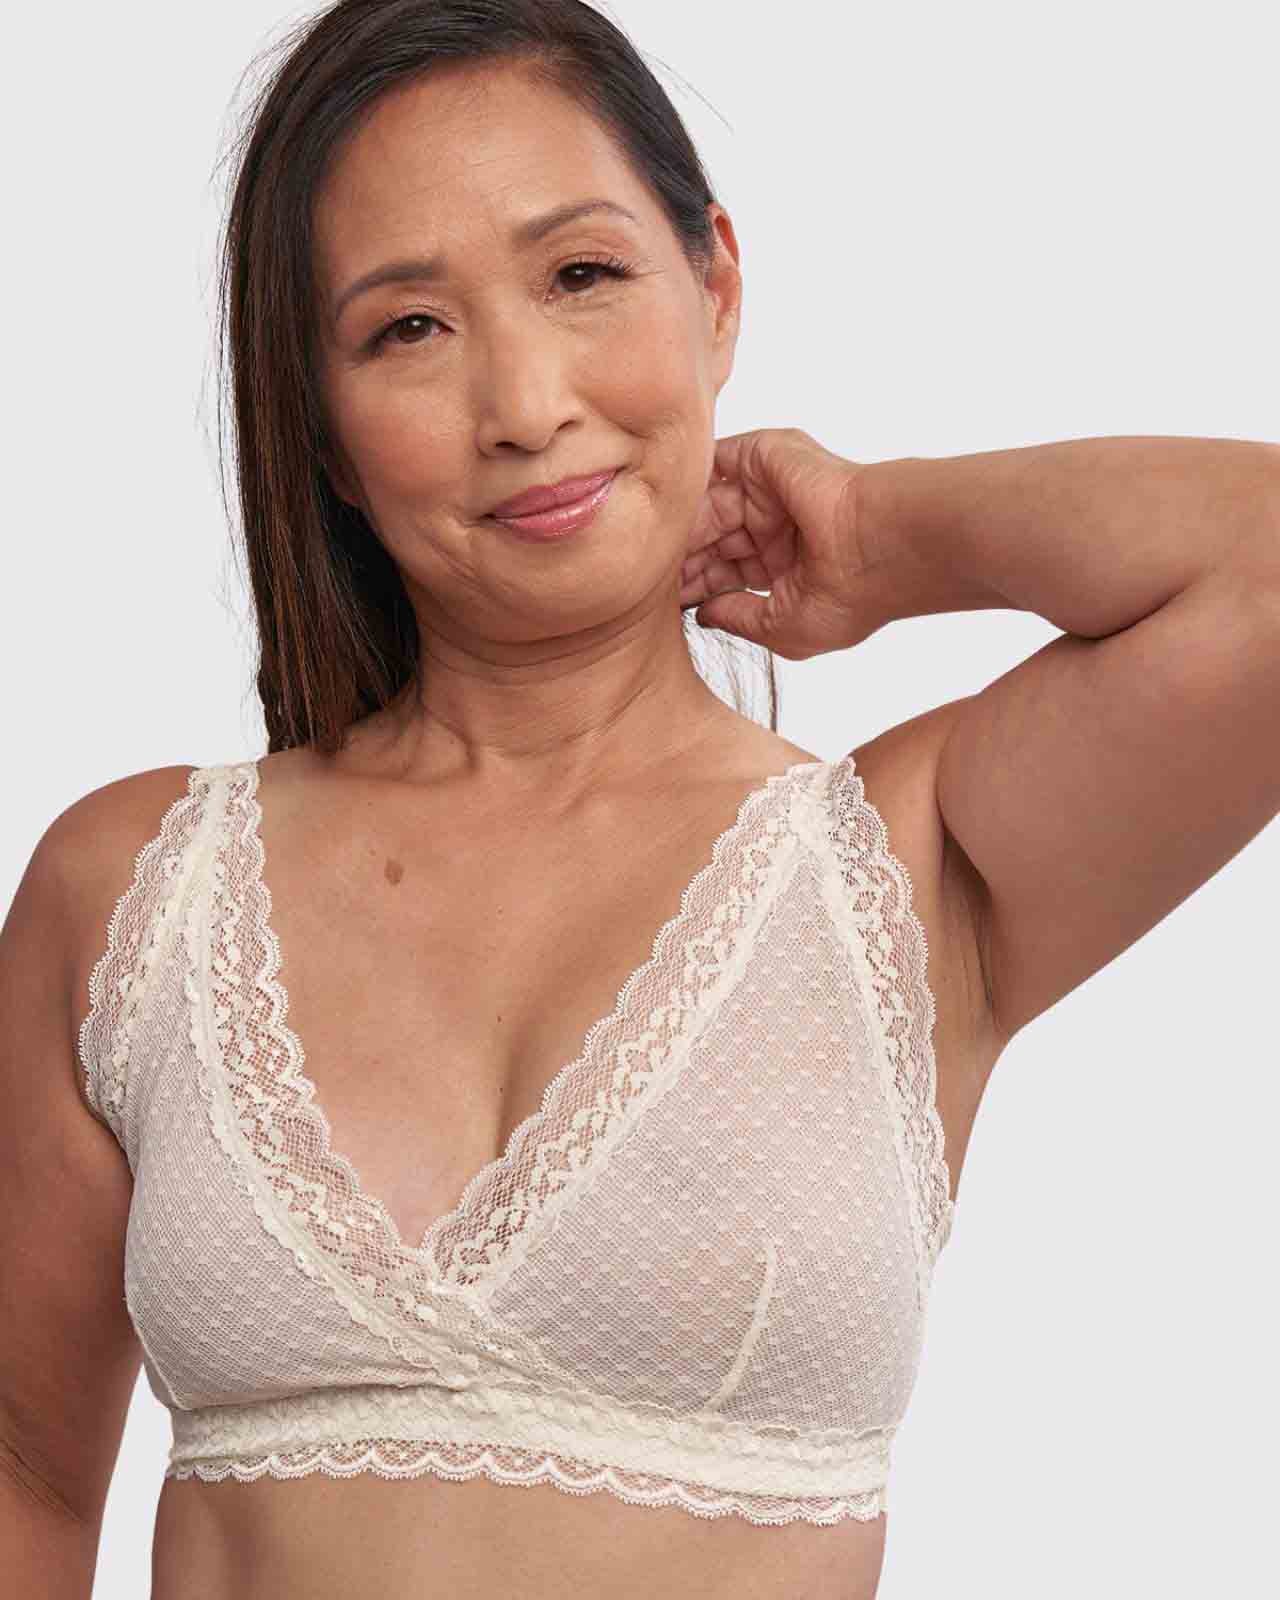 Susan Unilateral Mastectomy Wrap Front Lace Bra - M(34) / Ivory